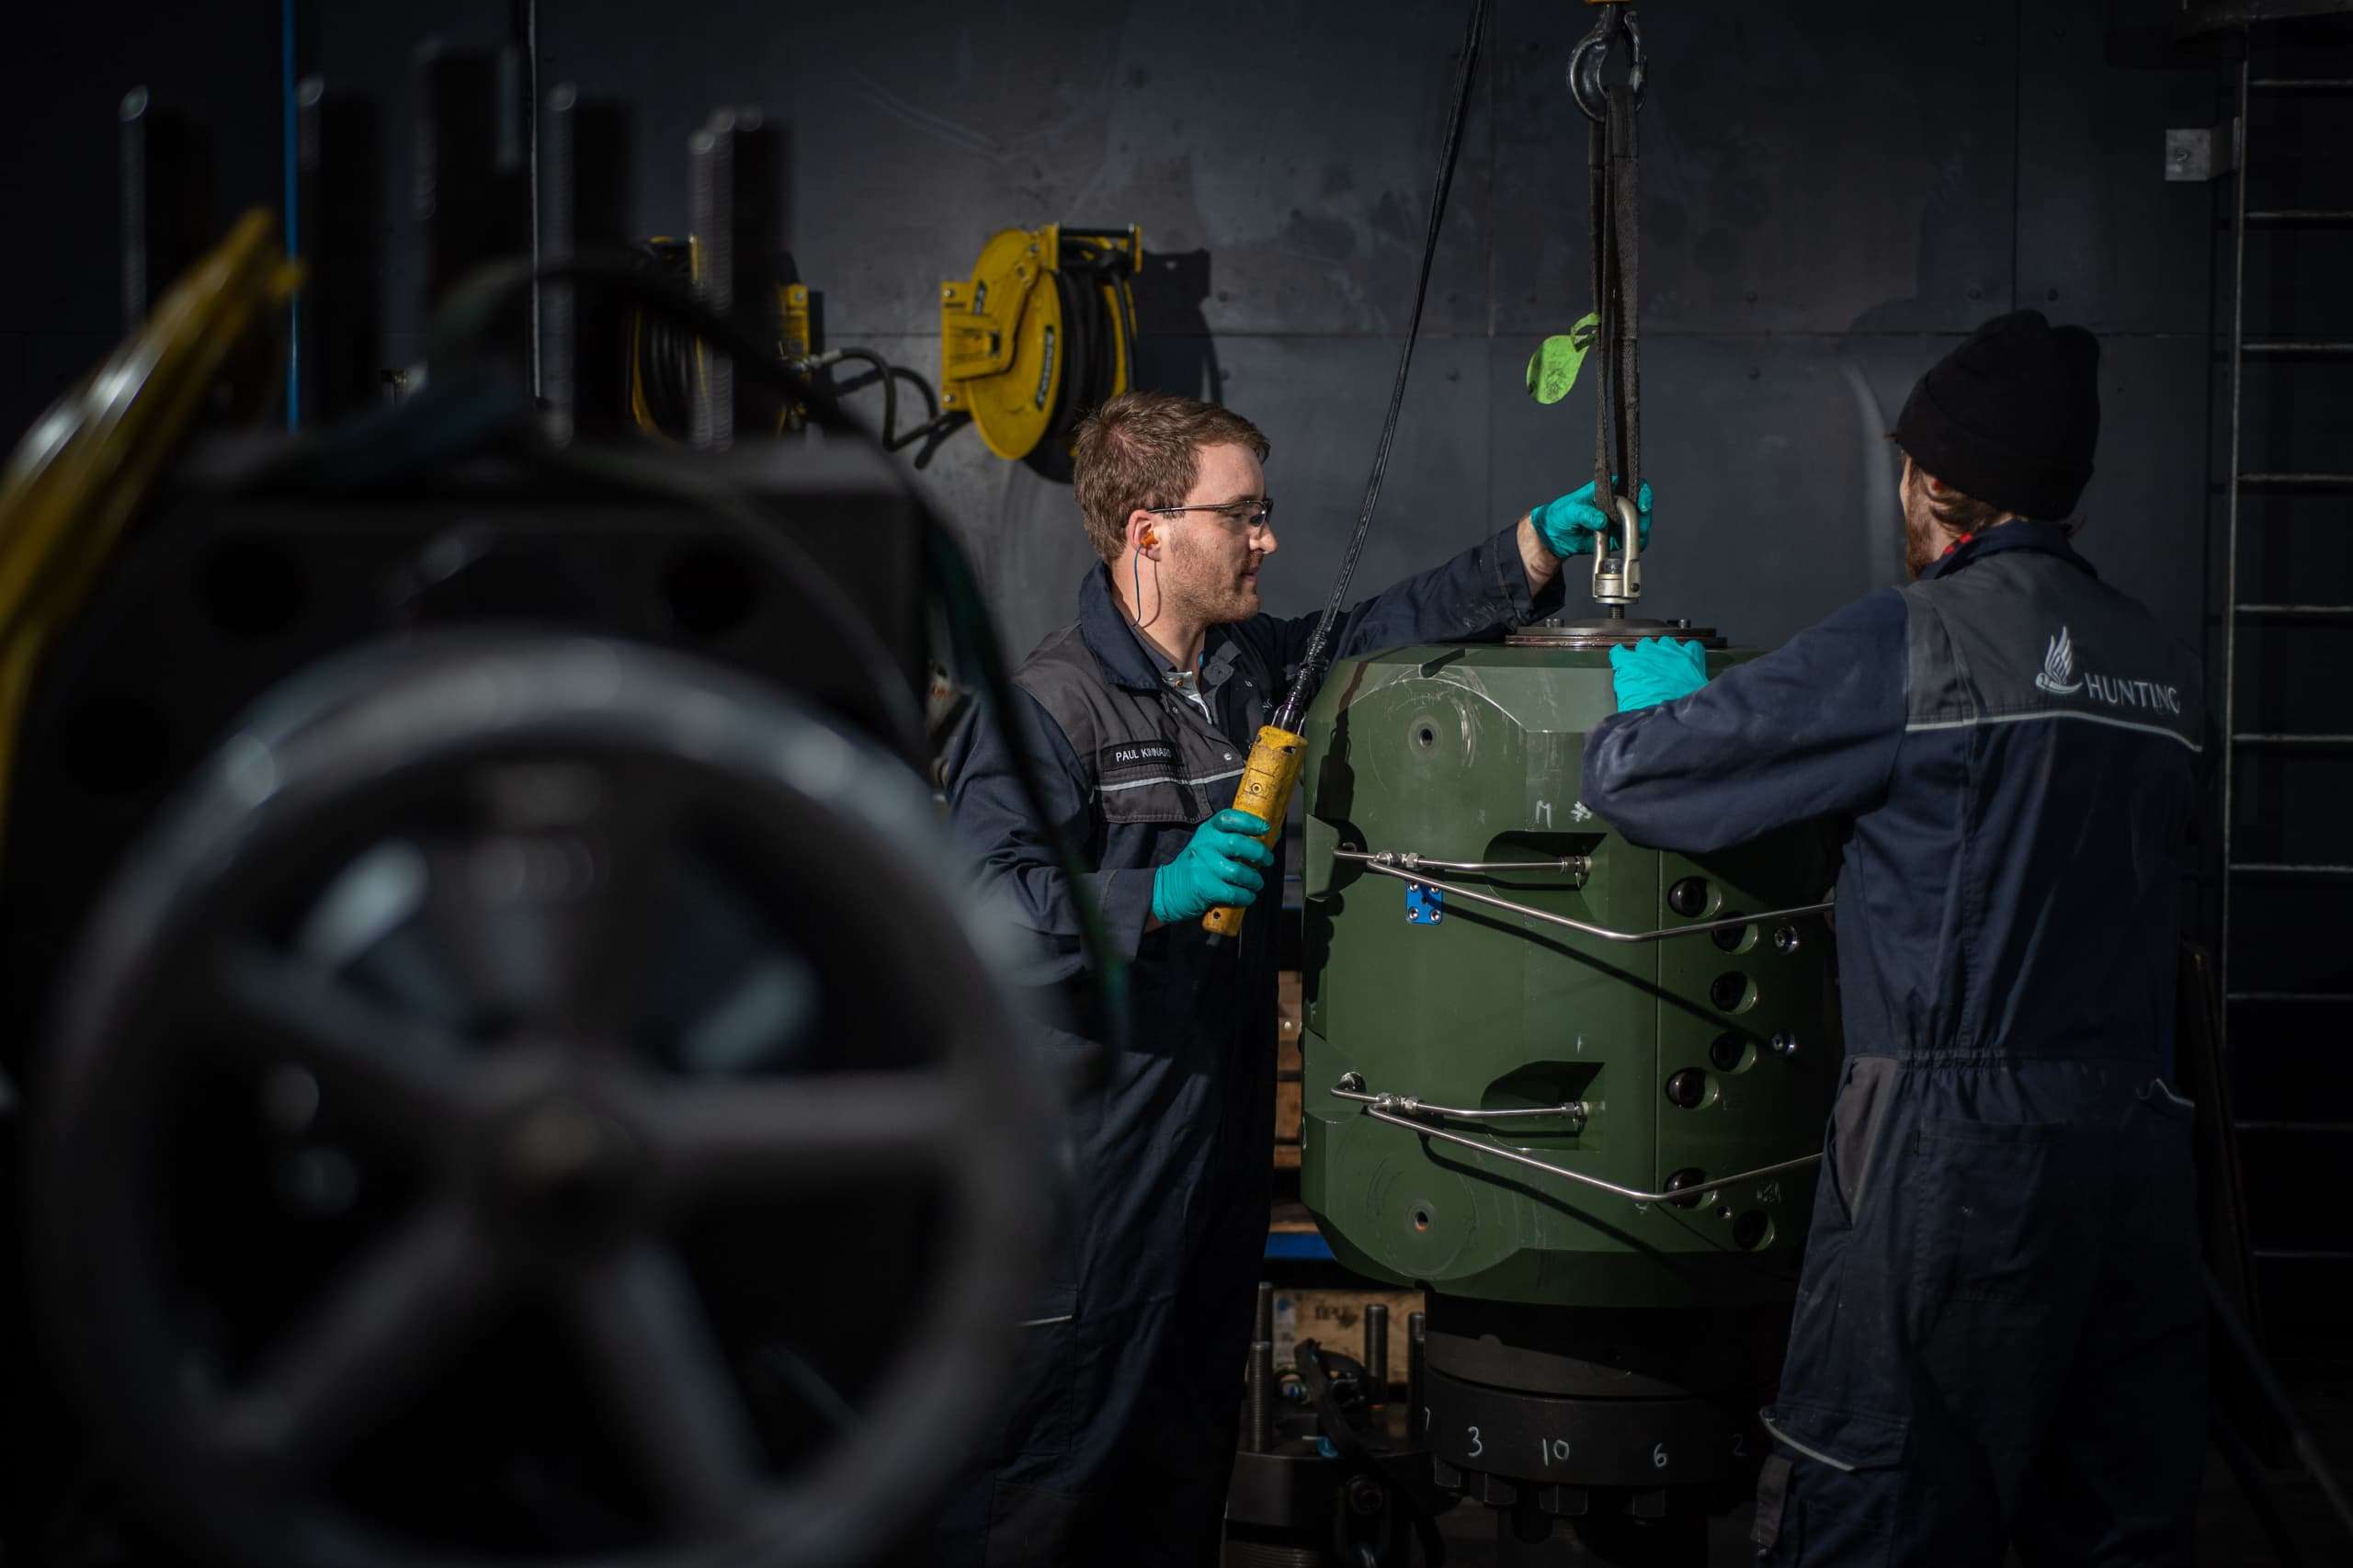 Two Hunting employees in boiler suits tend machinery